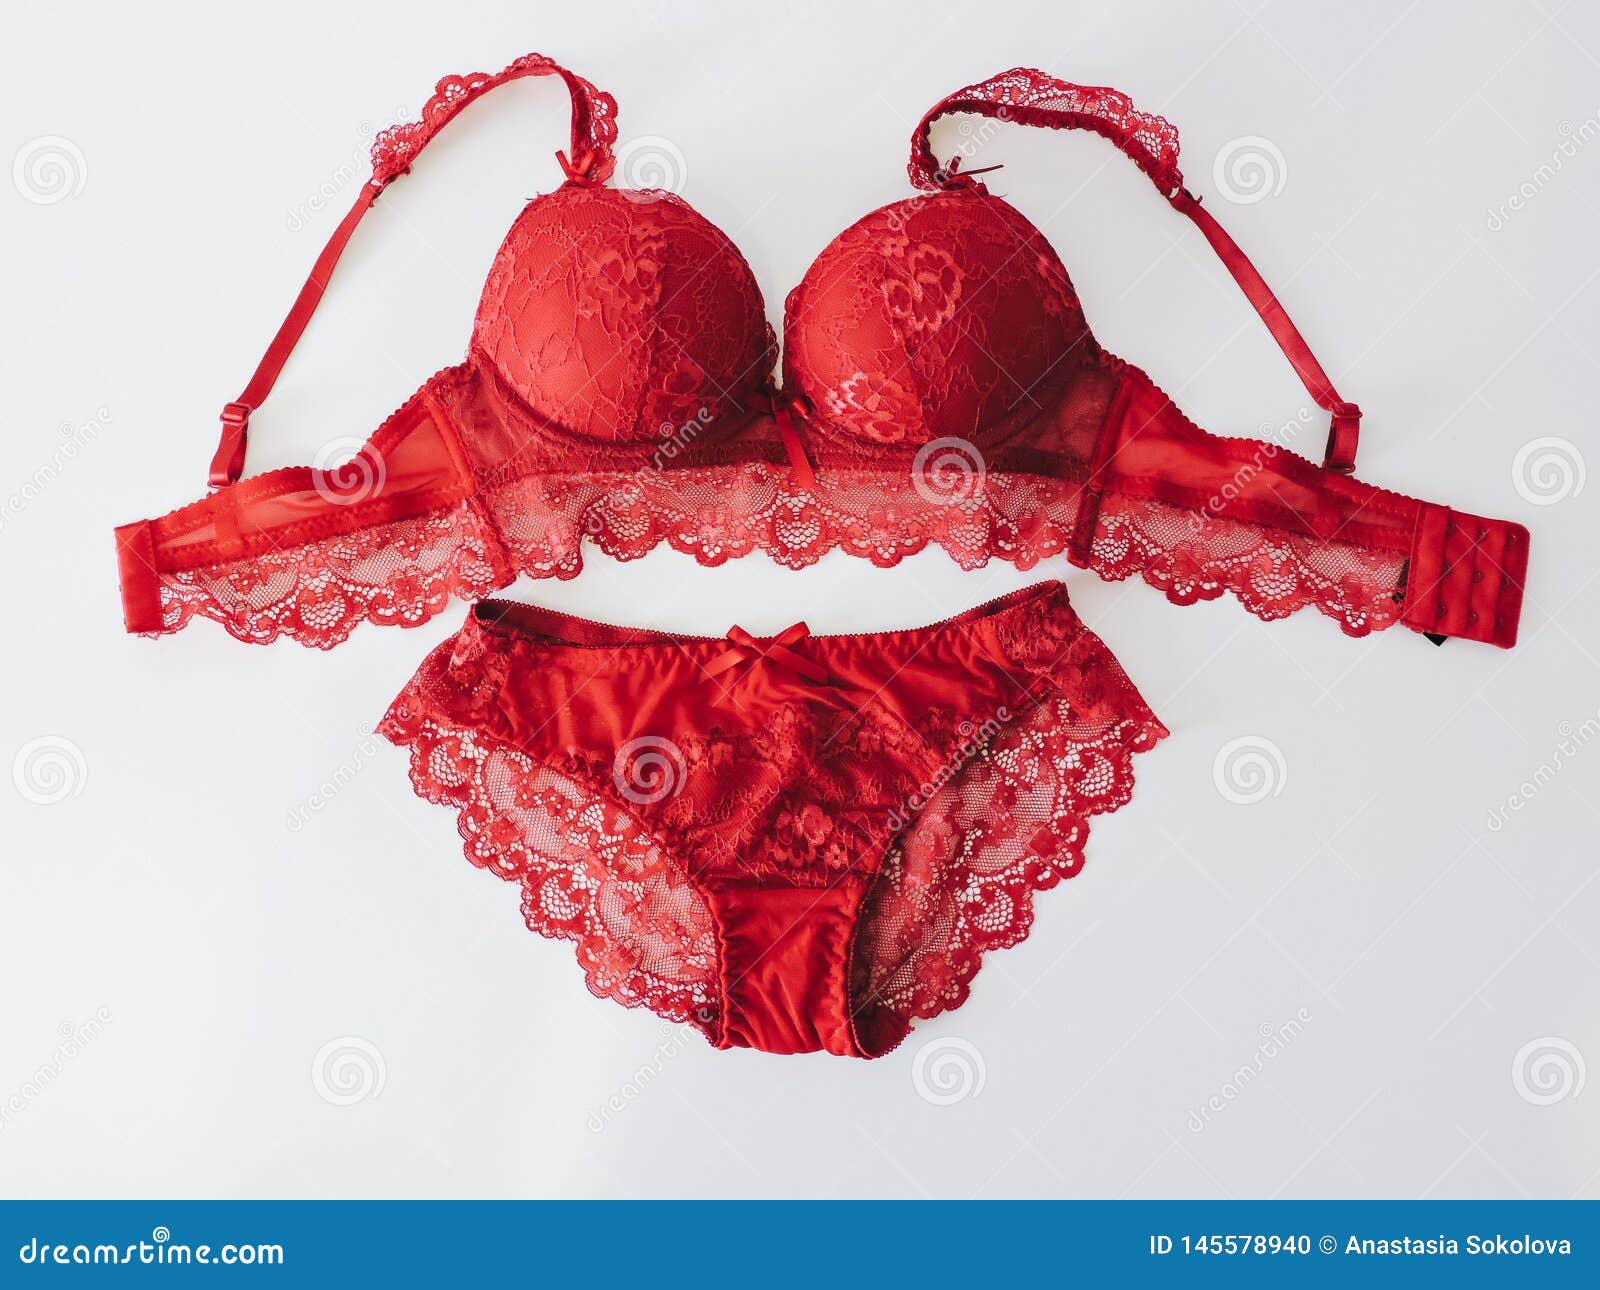 Red Women Underwear with Lace Isolated on White Background. Red